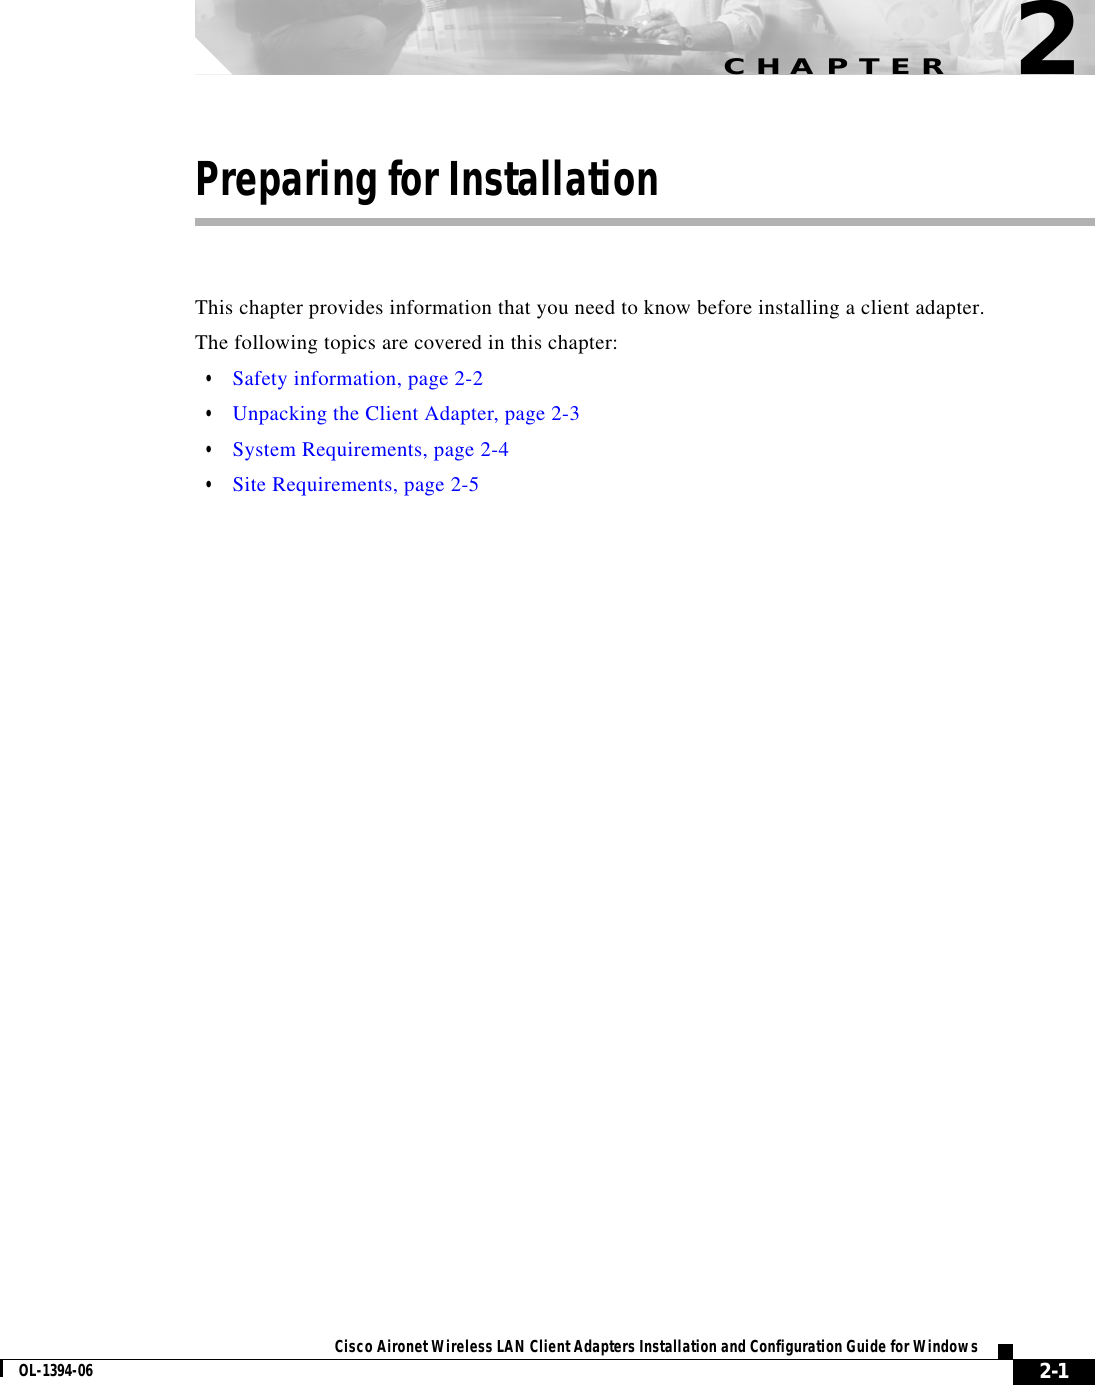 CHAPTER2-1Cisco Aironet Wireless LAN Client Adapters Installation and Configuration Guide for WindowsOL-1394-062Preparing for InstallationThis chapter provides information that you need to know before installing a client adapter.The following topics are covered in this chapter:•Safety information, page 2-2•Unpacking the Client Adapter, page 2-3•System Requirements, page 2-4•Site Requirements, page 2-5